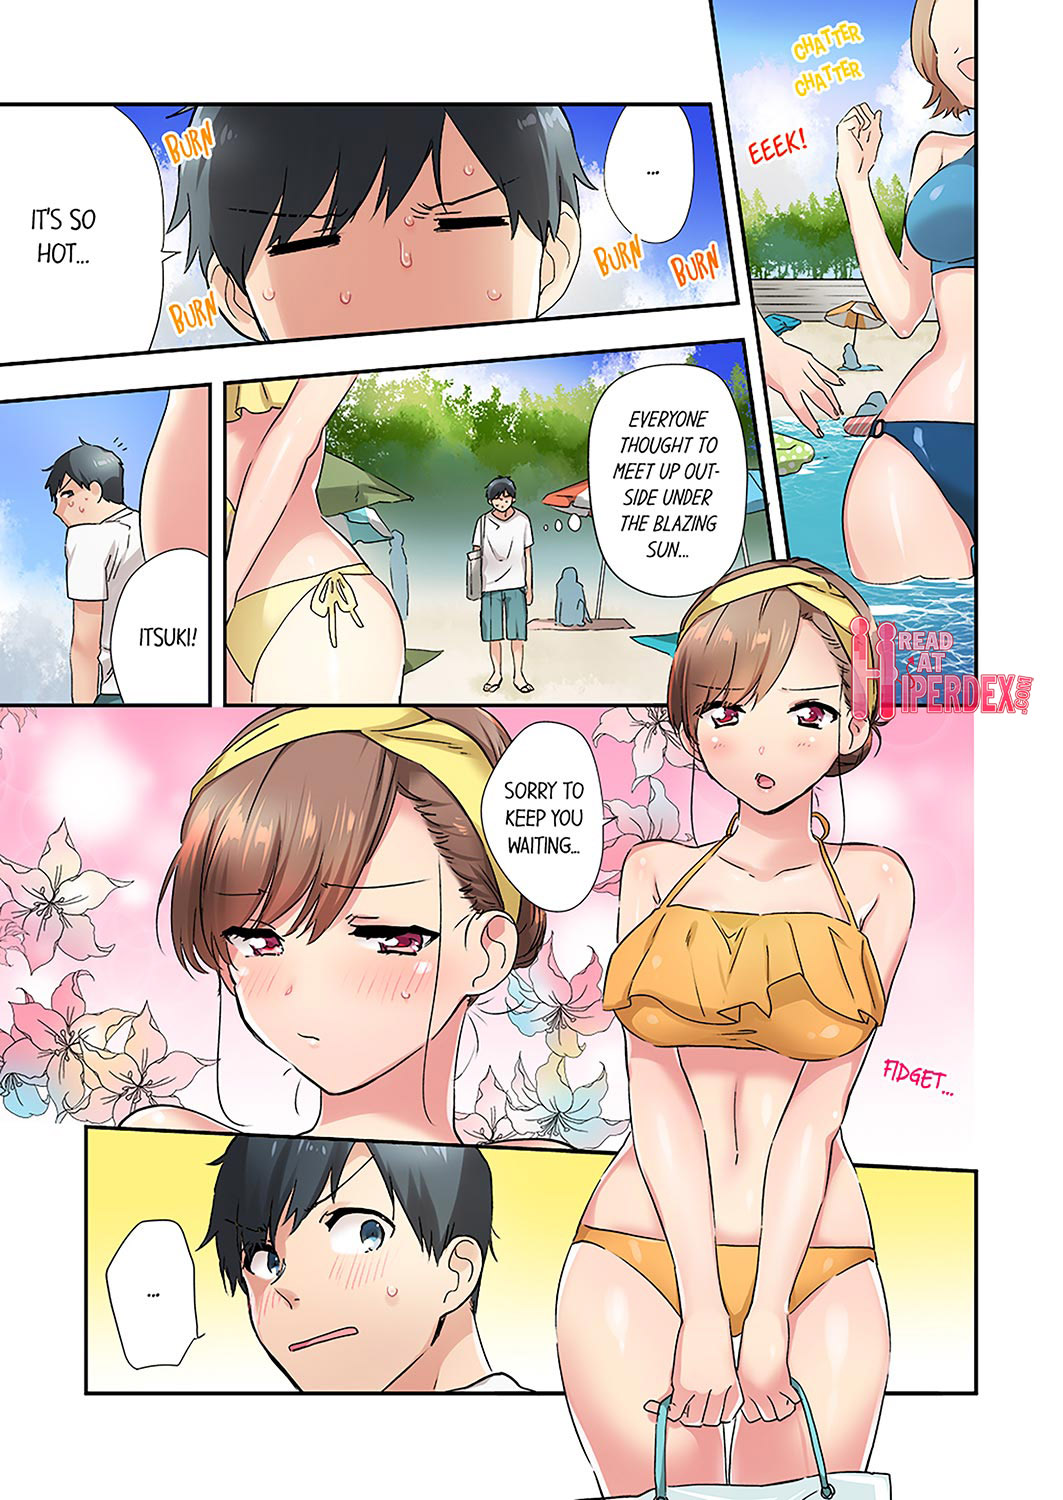 A Scorching Hot Day with A Broken Air Conditioner. If I Keep Having Sex with My Sweaty Childhood Friend… - Chapter 10 Page 1